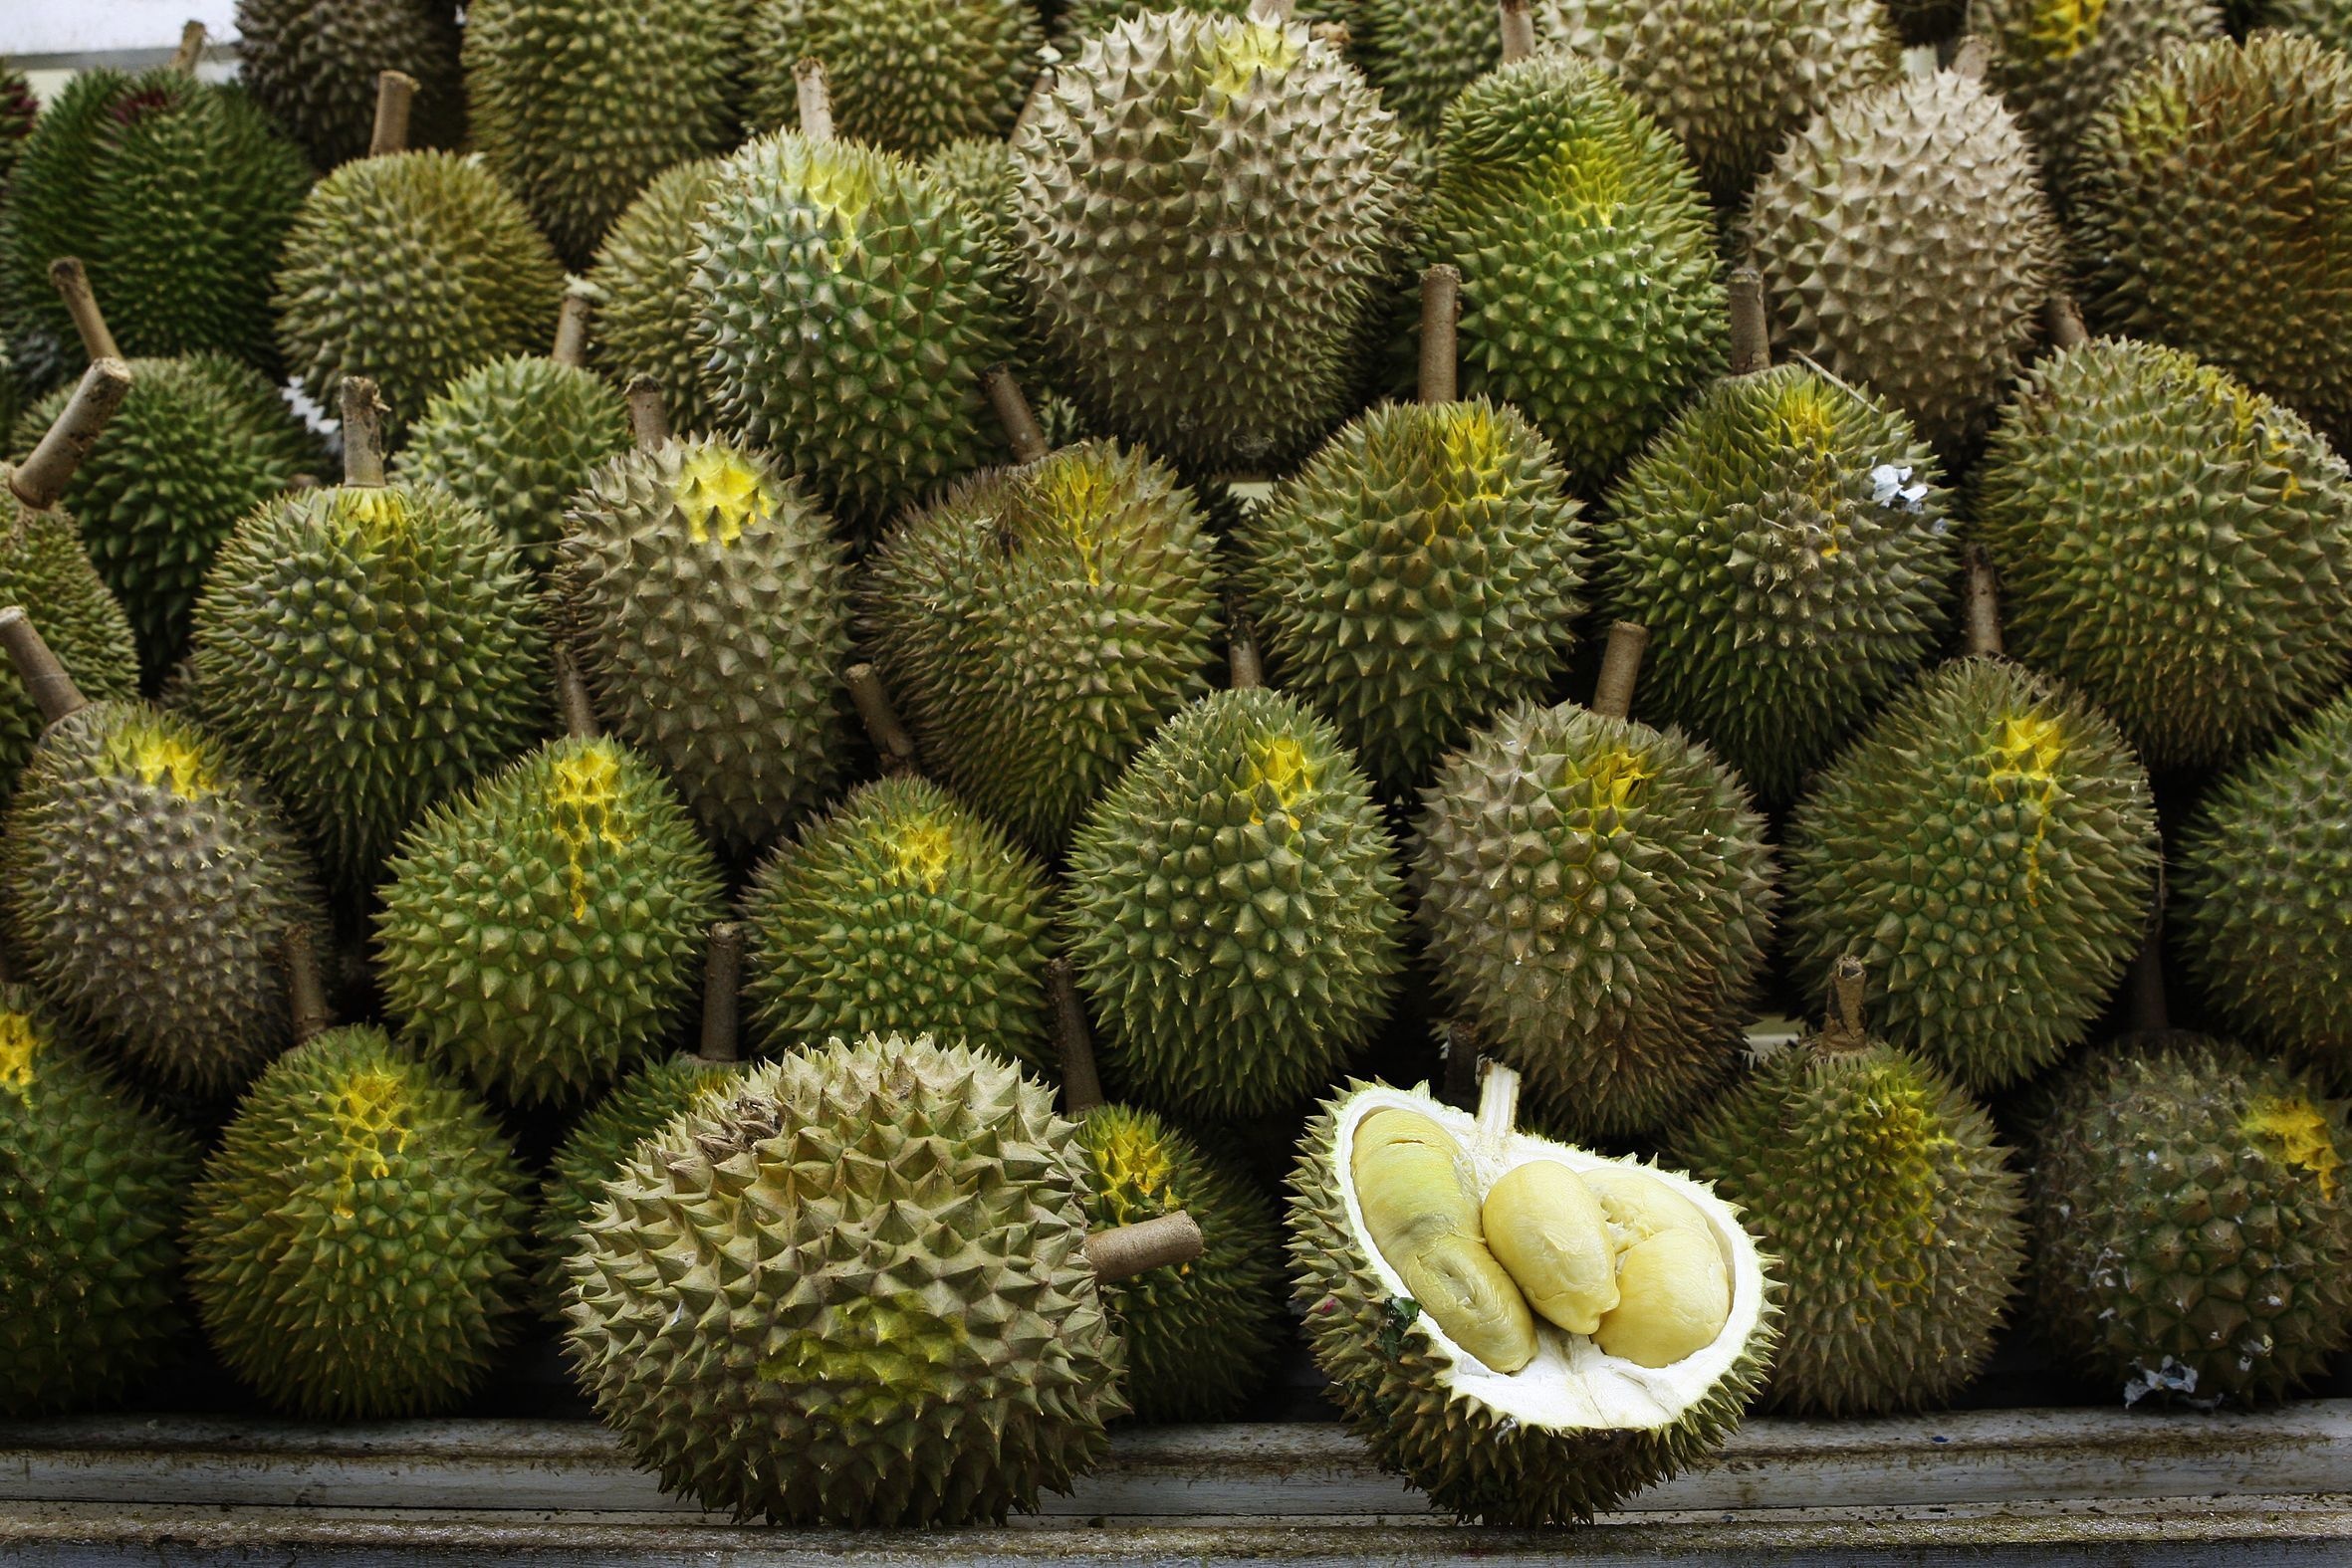 Durian: A spiny oval tropical fruit containing a creamy pulp. 2370x1580 HD Wallpaper.